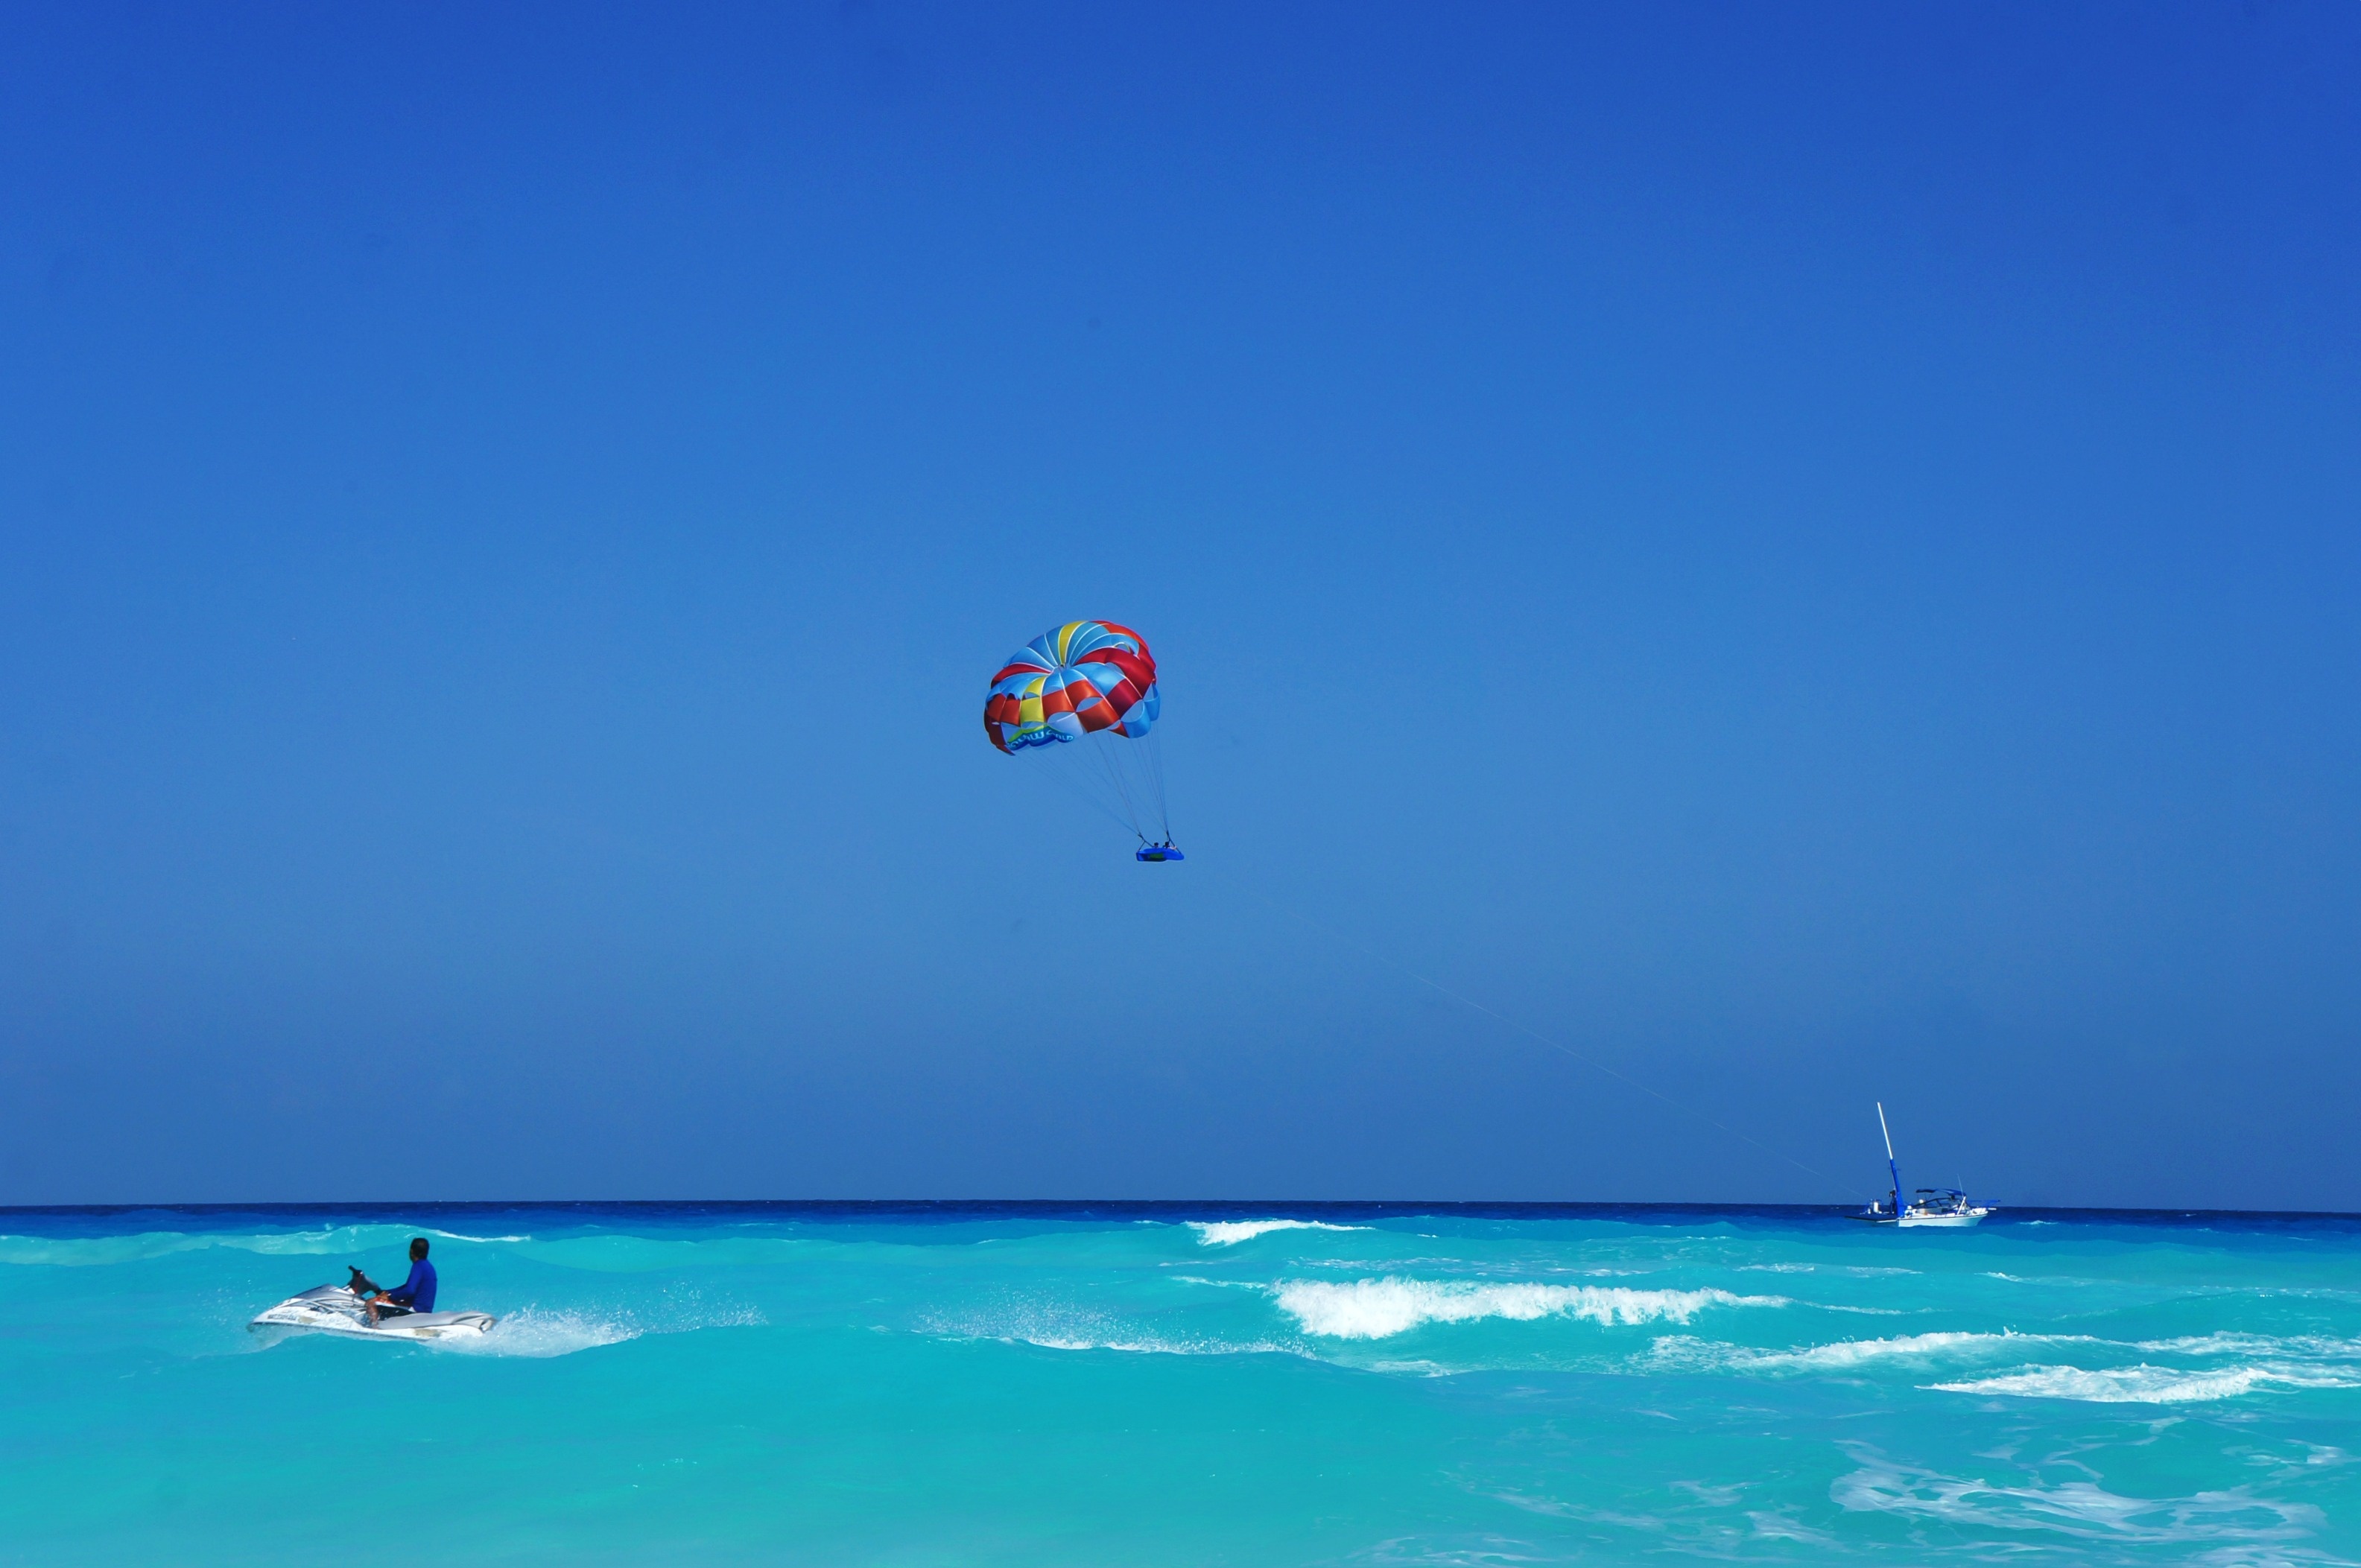 Parasailing: A person towed behind a boat, A specially designed canopy wing, Watercraft, Mexico. 3170x2110 HD Background.